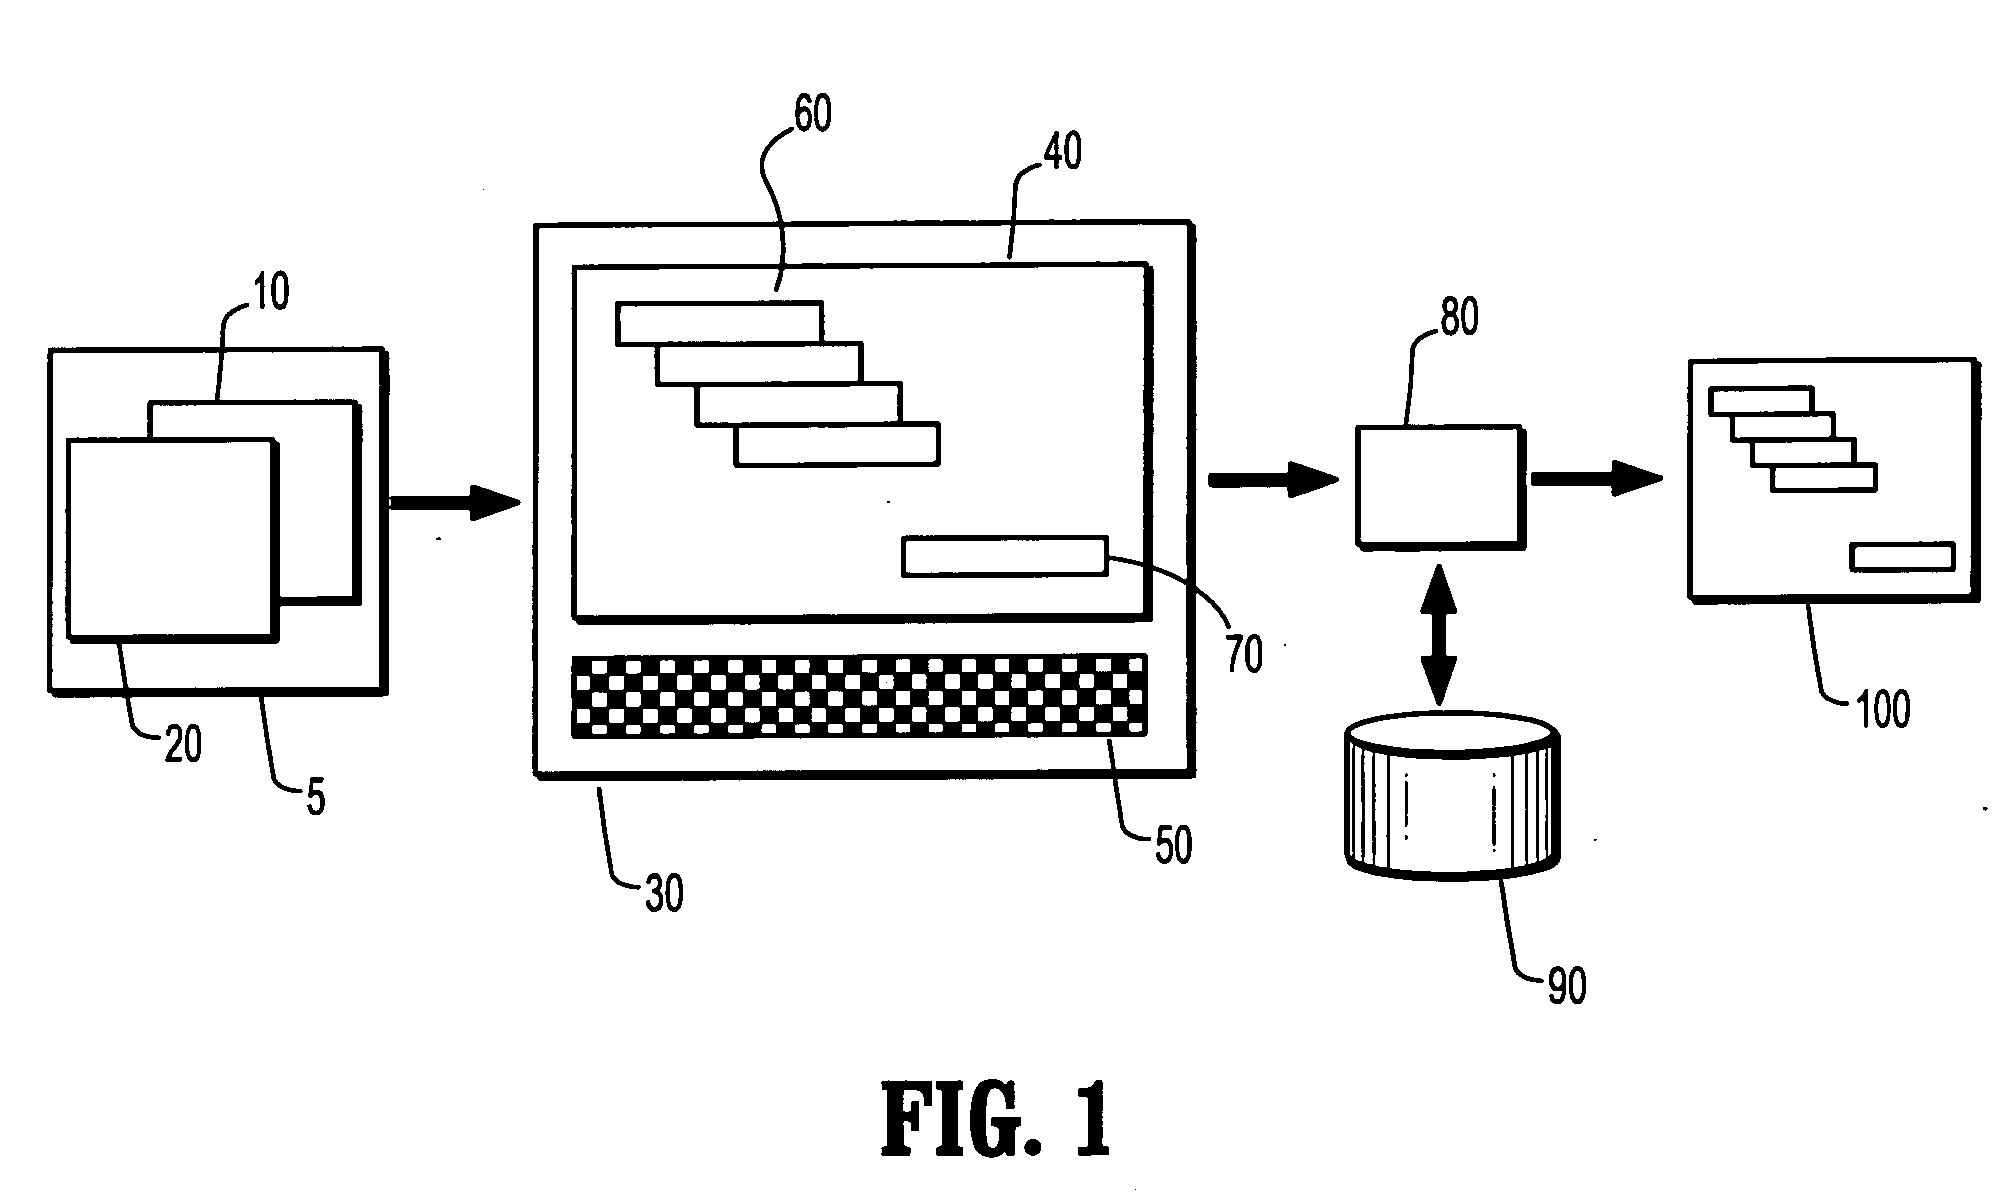 Method and system for generating and validating clinical reports with built-in automated measurement and decision support